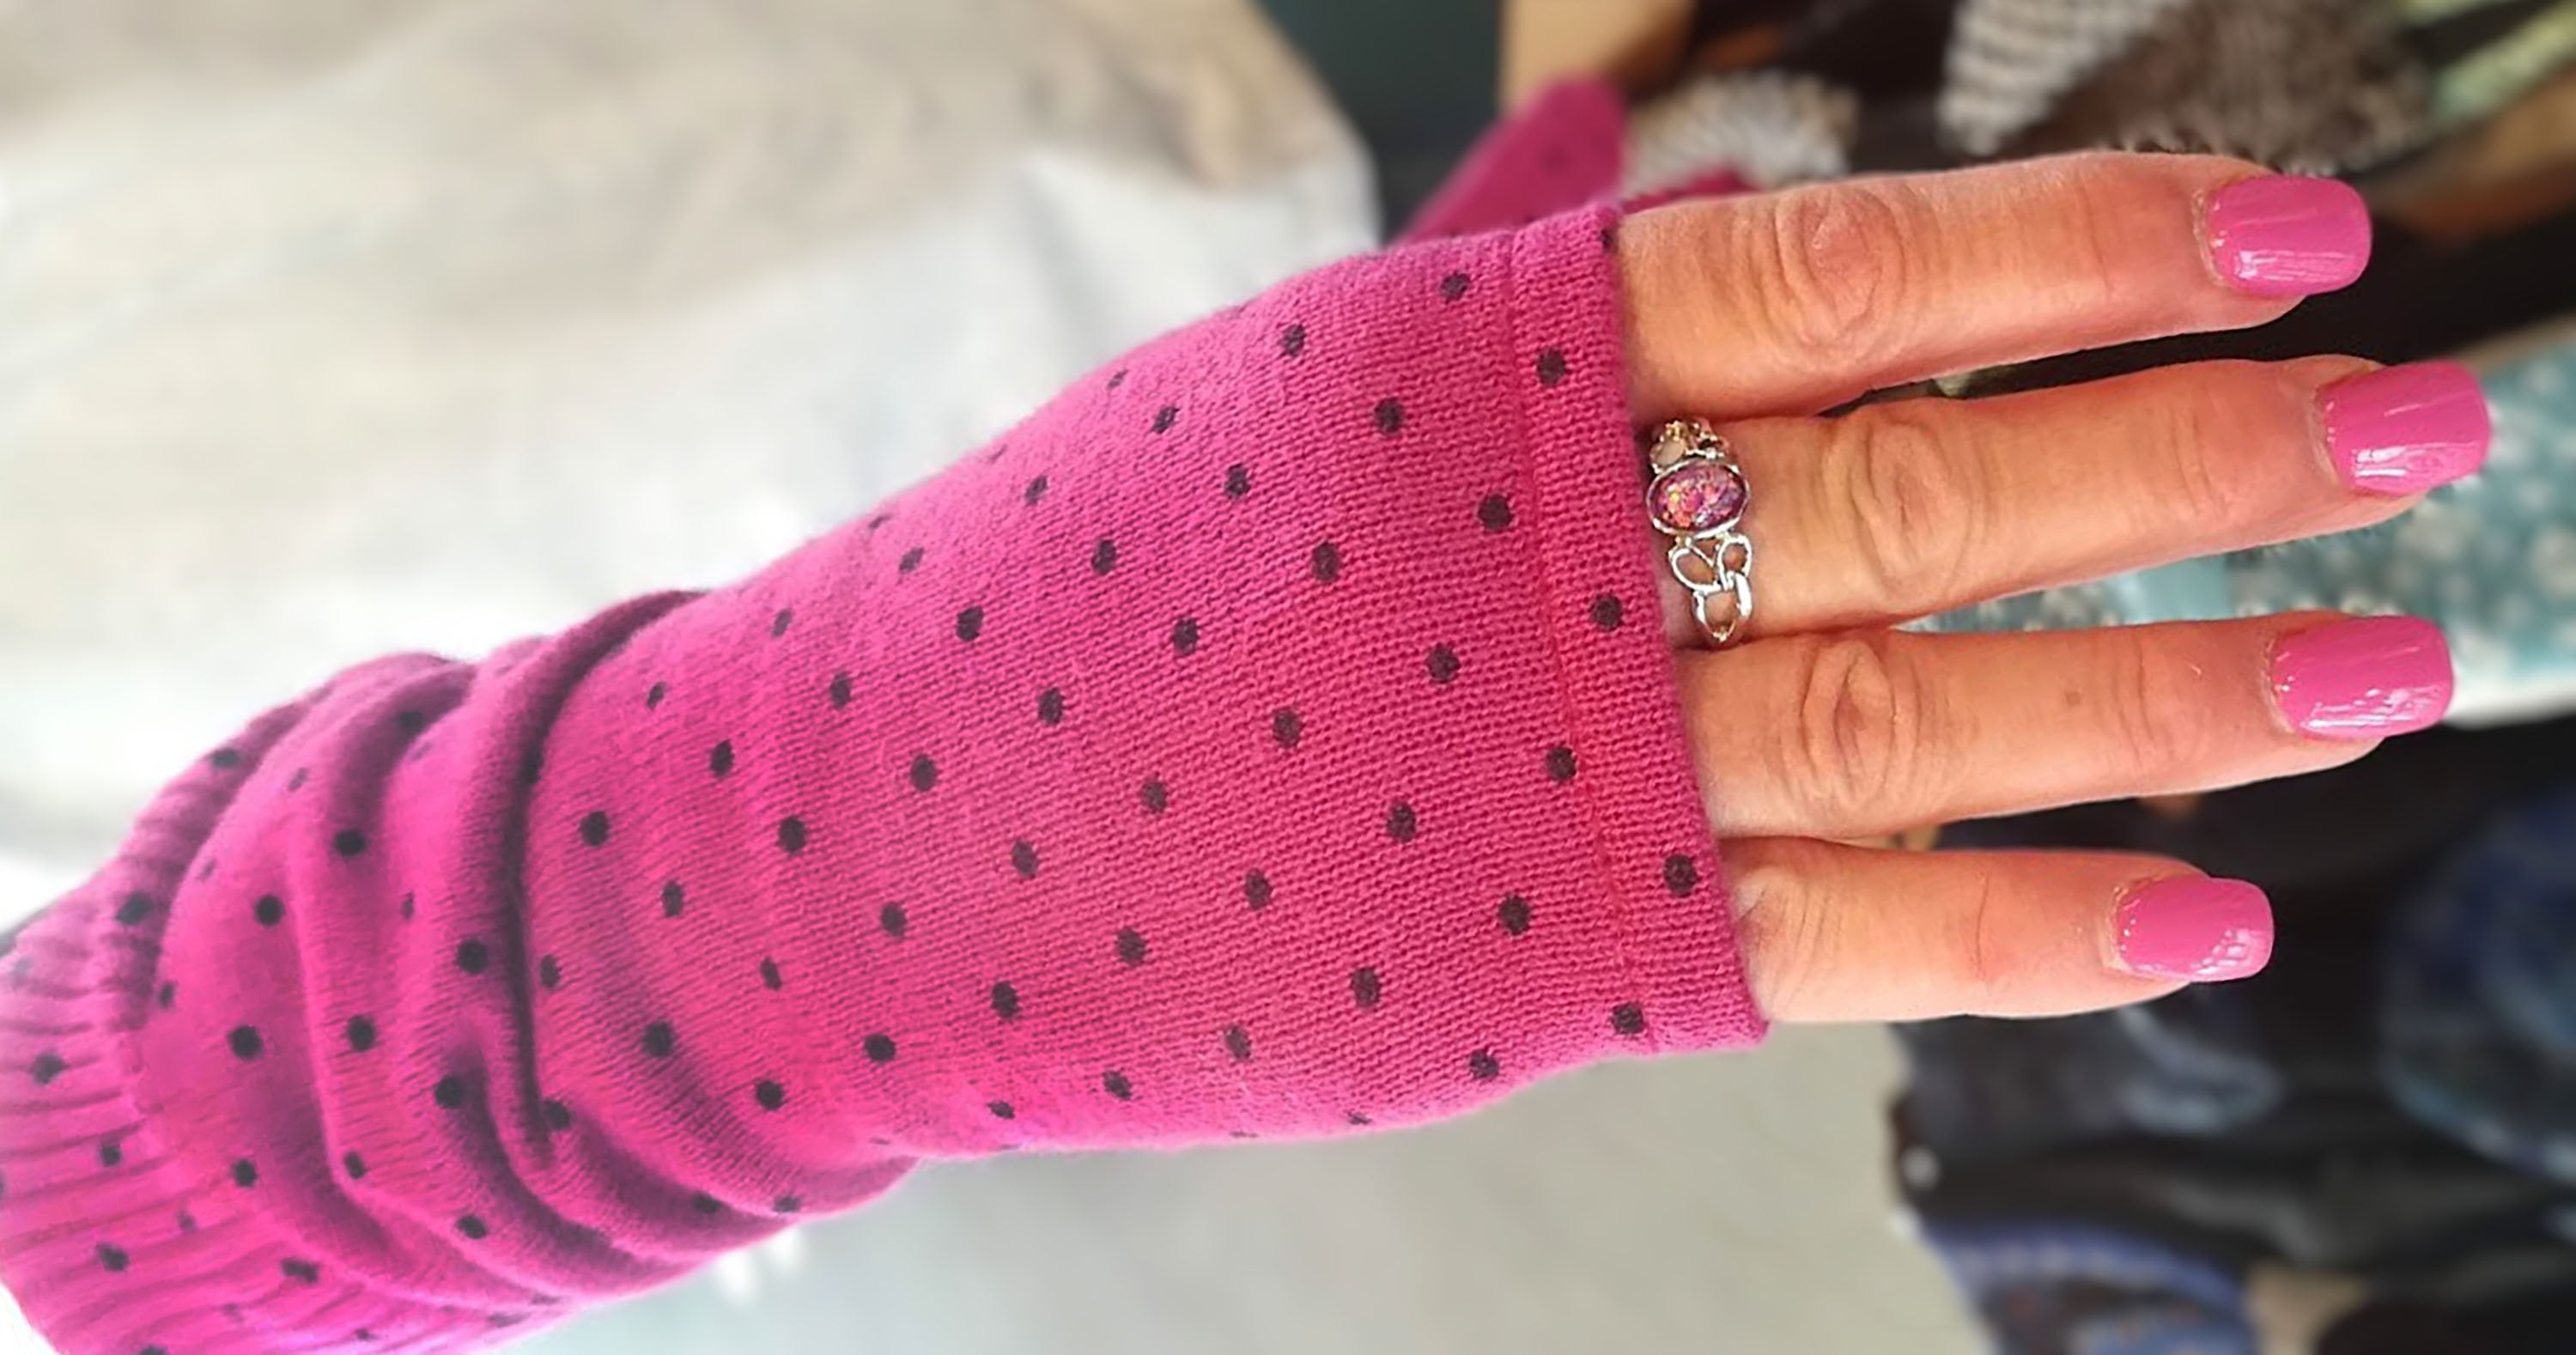 Hand wearing long fingerless Kitten Mittens in pink with black dots